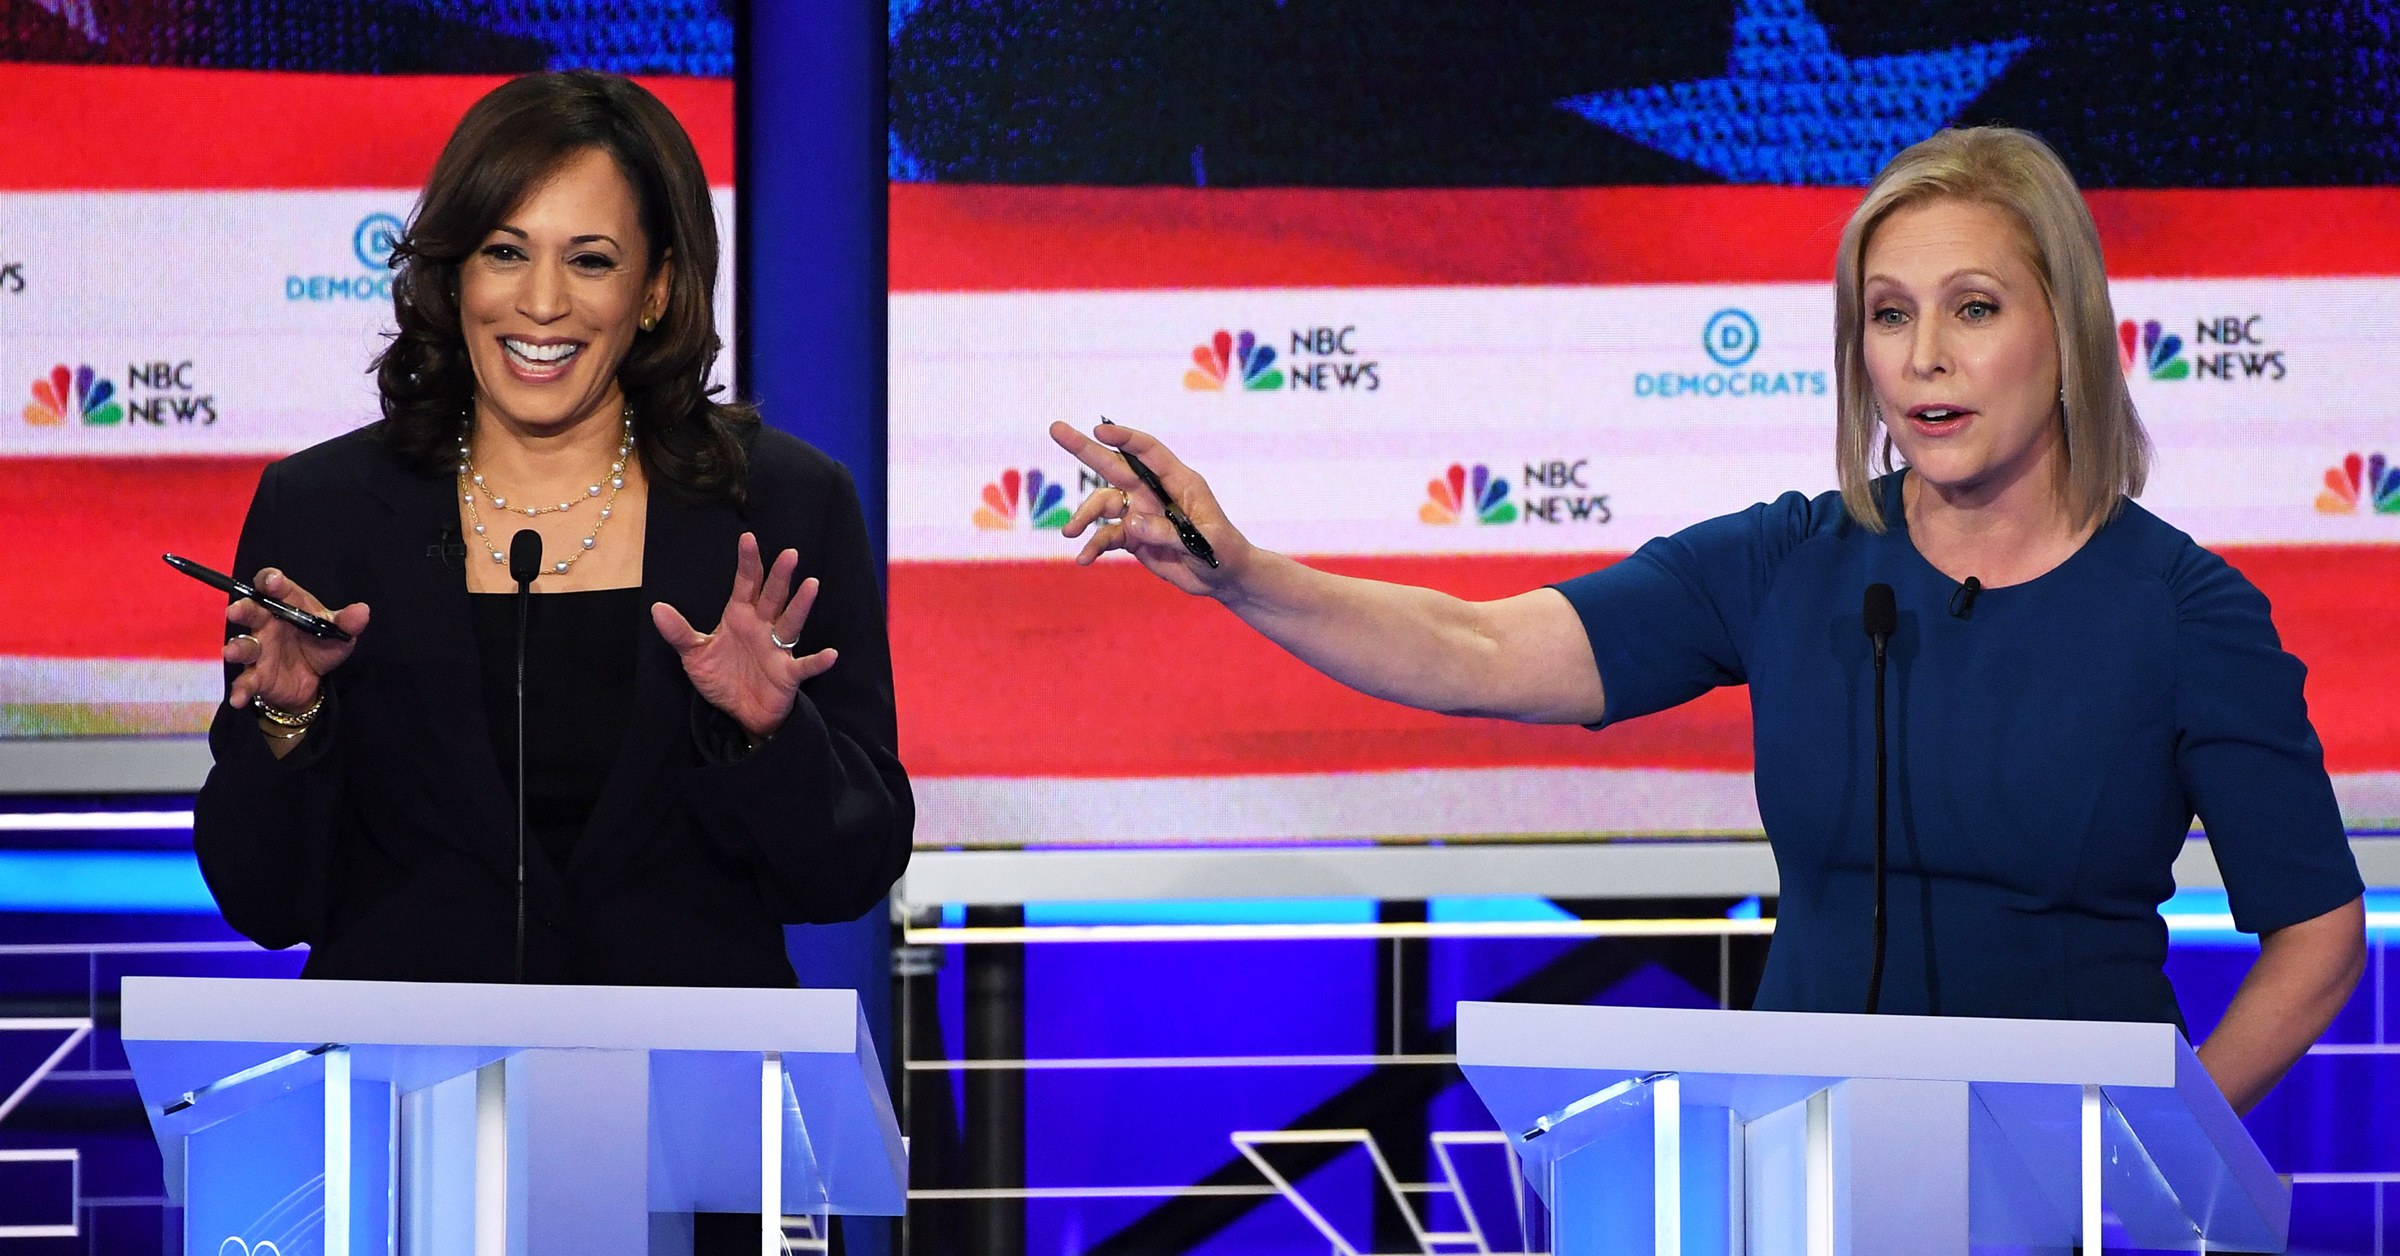 How to Watch the Second 2020 Democratic Primary Debate